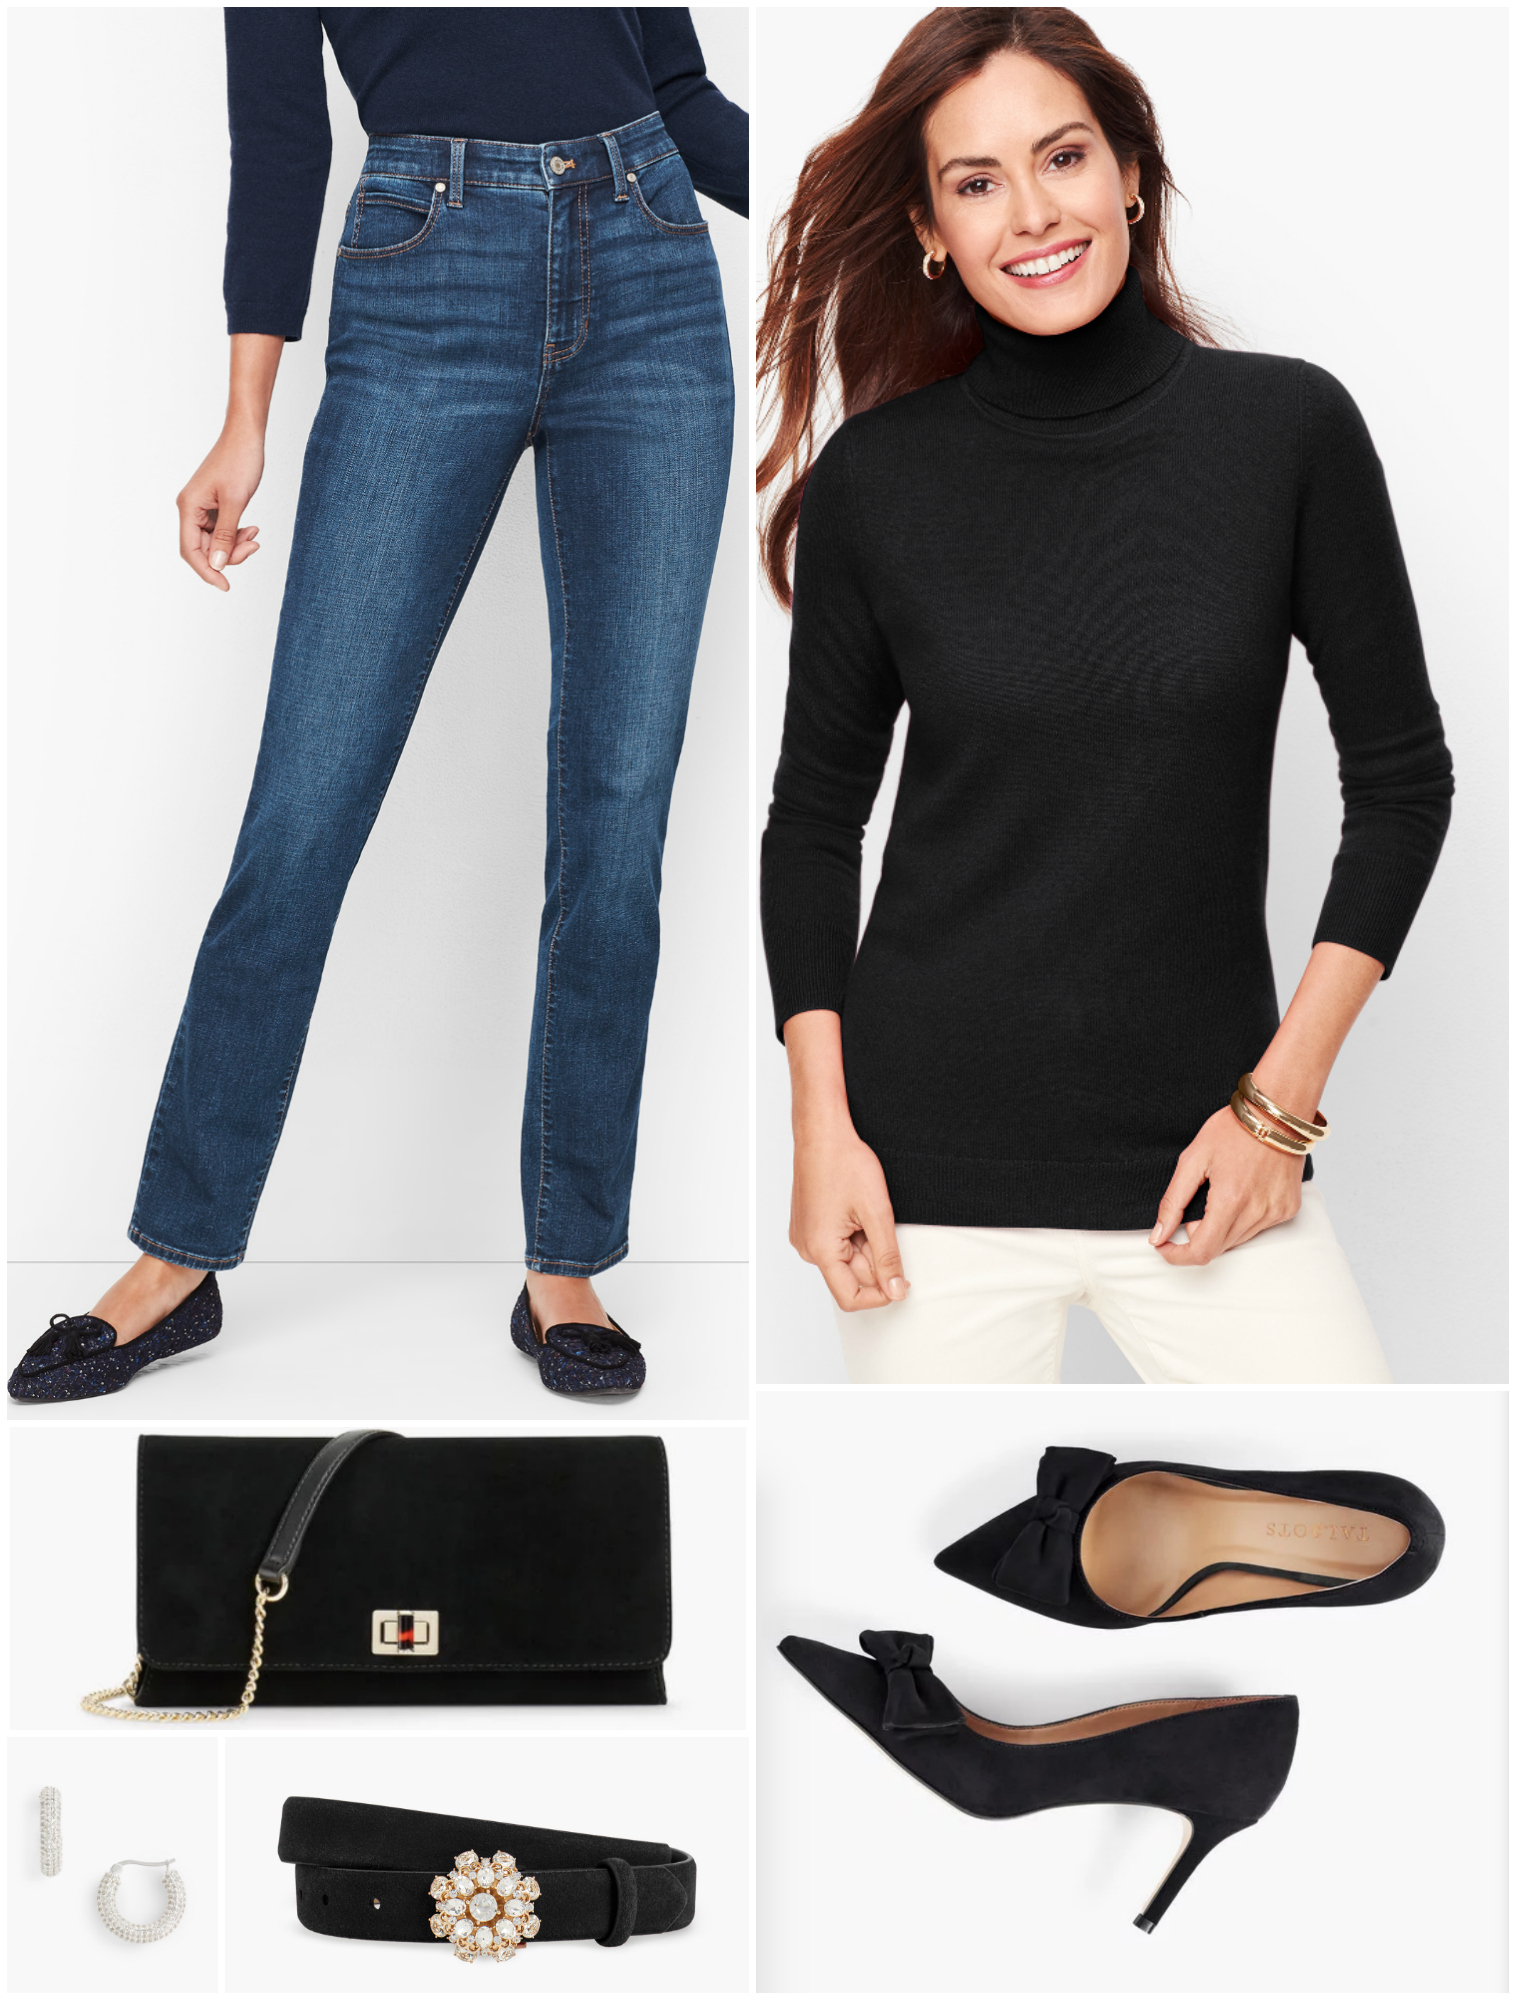 Who says you need to wear a "holiday" color to look festive?  Just by adding glam accessories to this classic ensemble of jeans and a cashmere turtleneck, this outfit is perfect for the season!